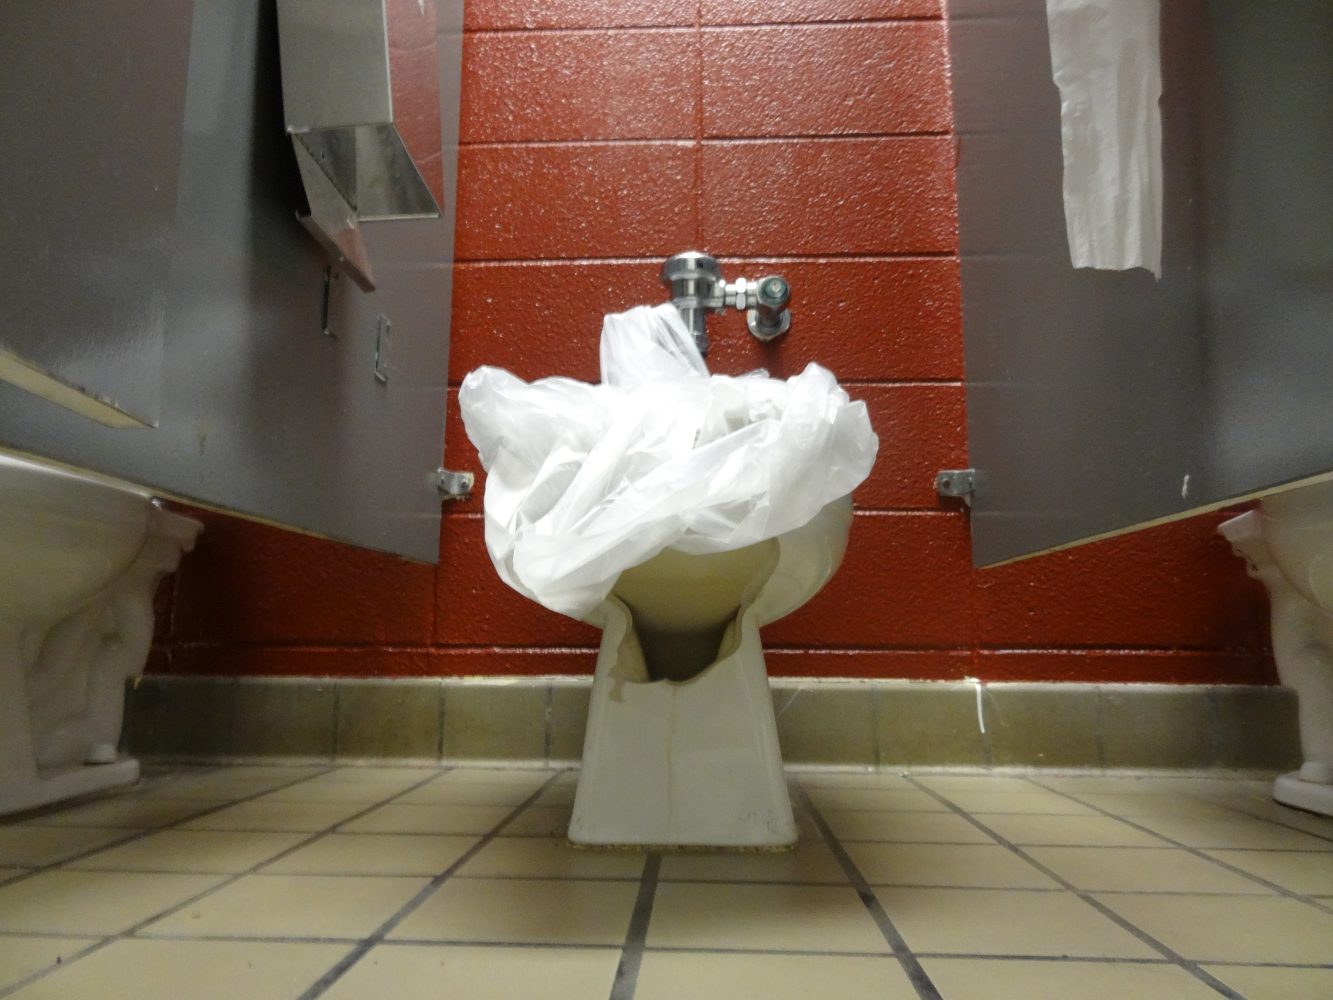 Out-of-order behavior causes out-of-order restrooms